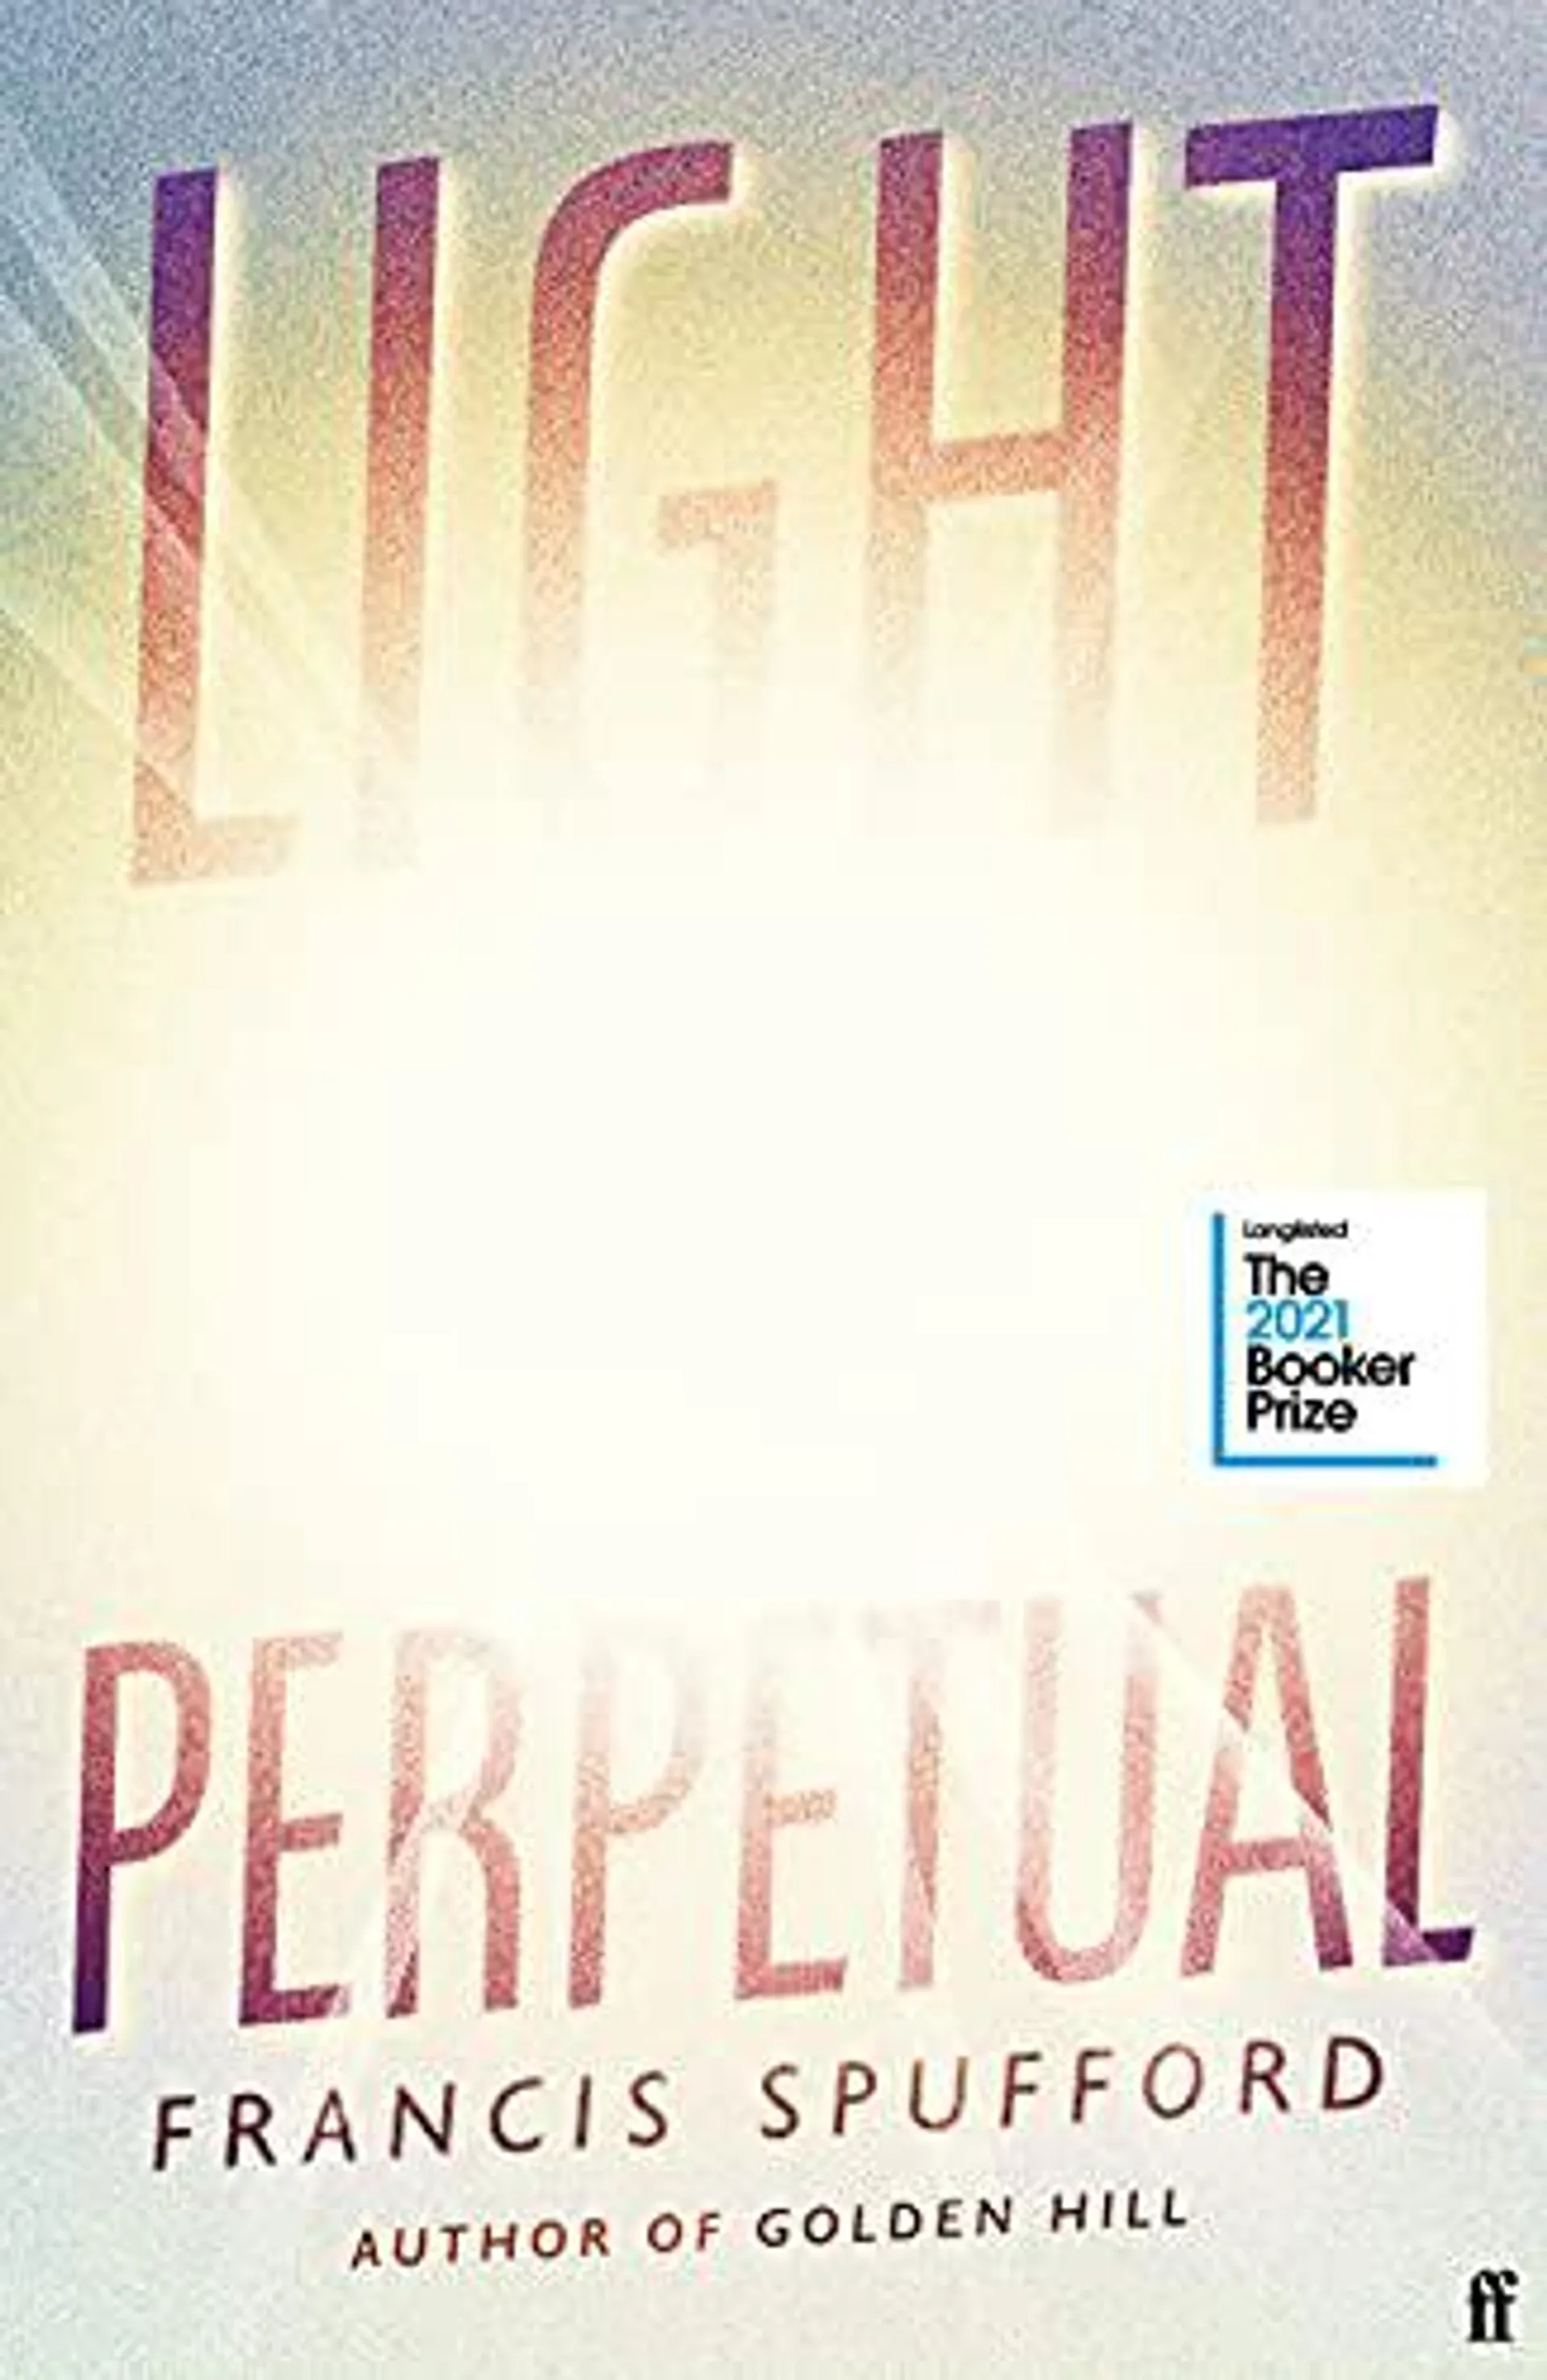 Light Perpetual by Francis Spufford